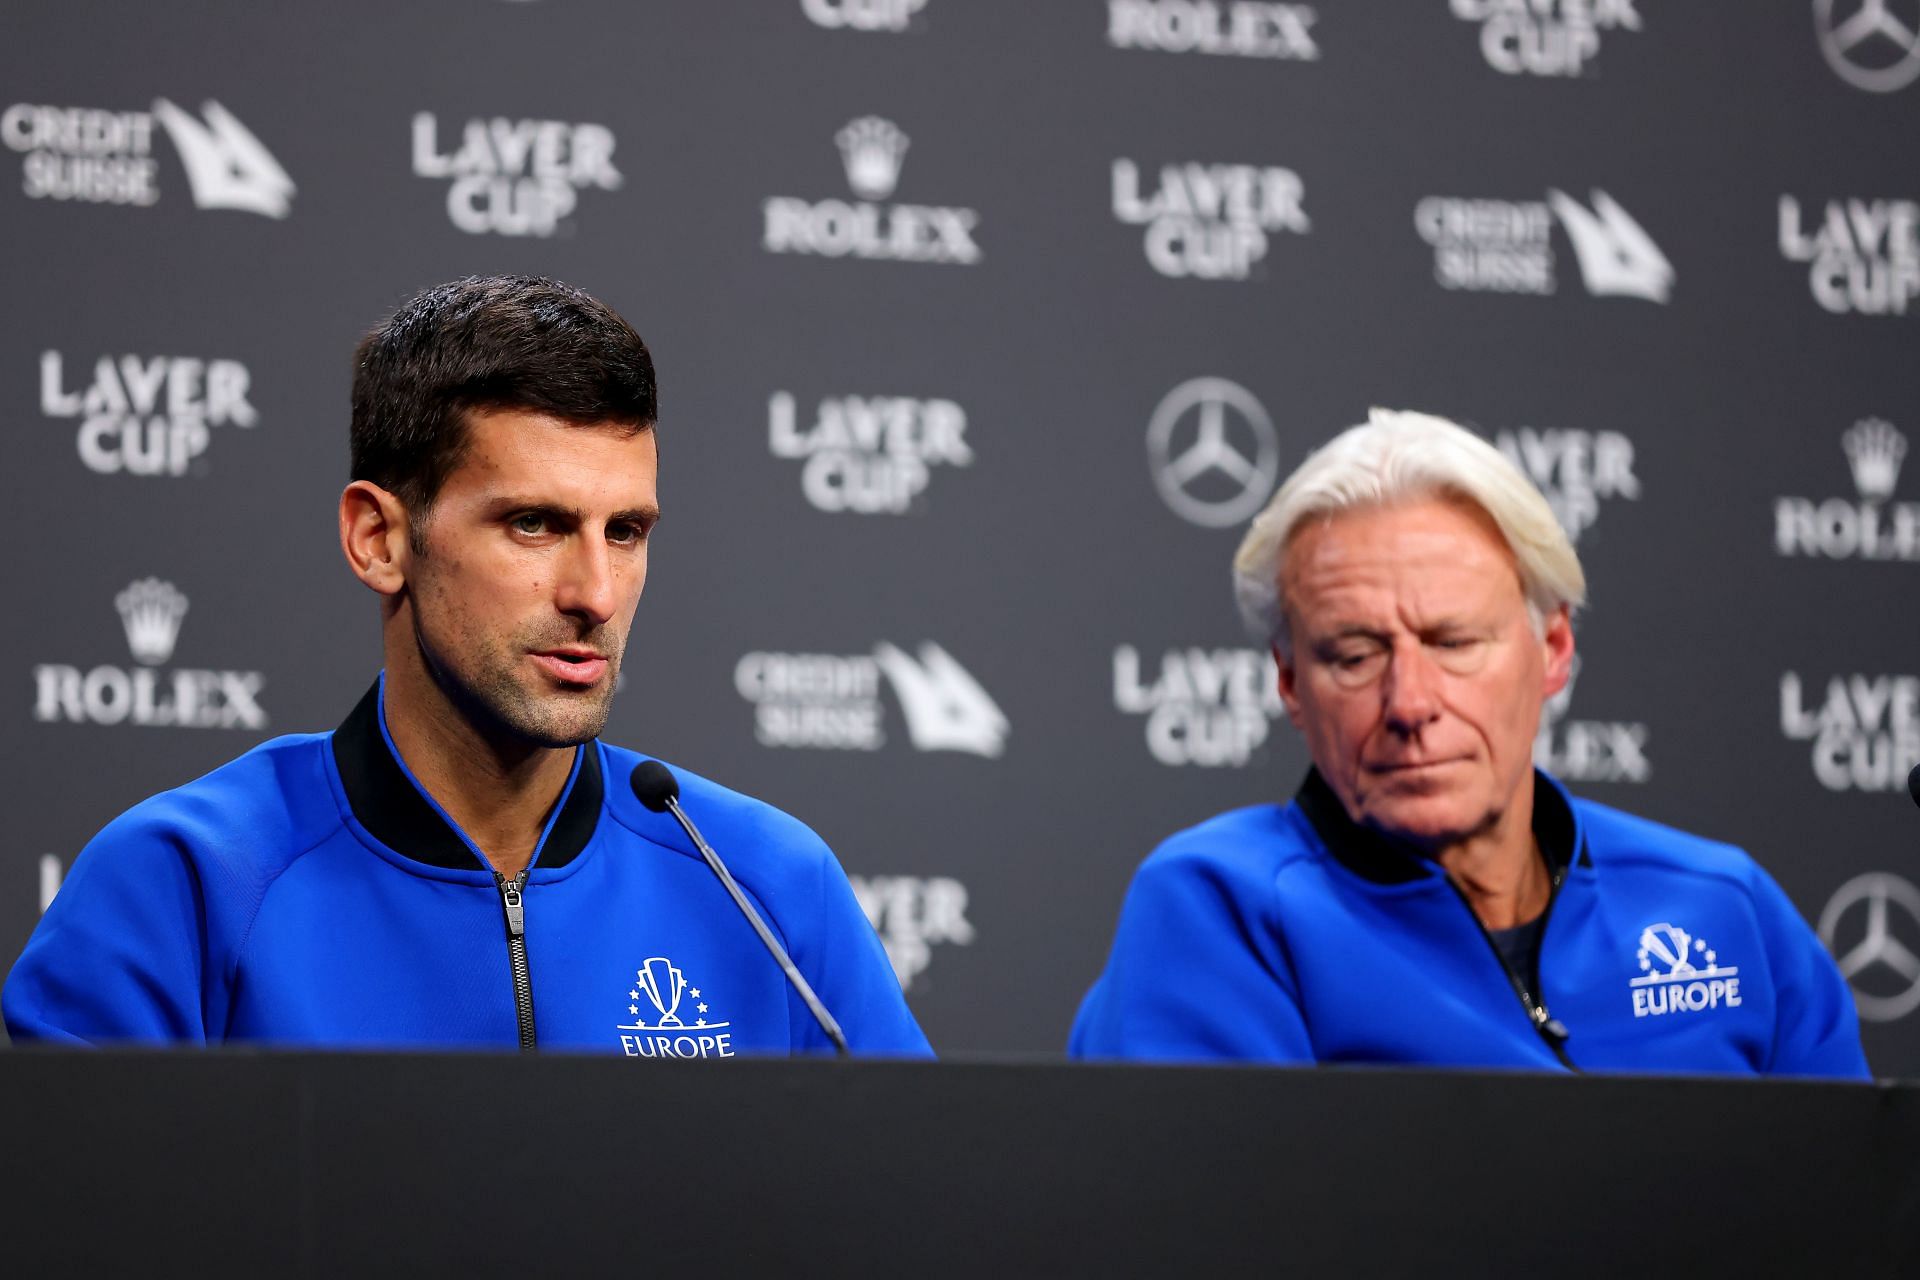 Novak Djokovic and Bjorn Borg talk to the media at the Laver Cup 2022 - Day Three